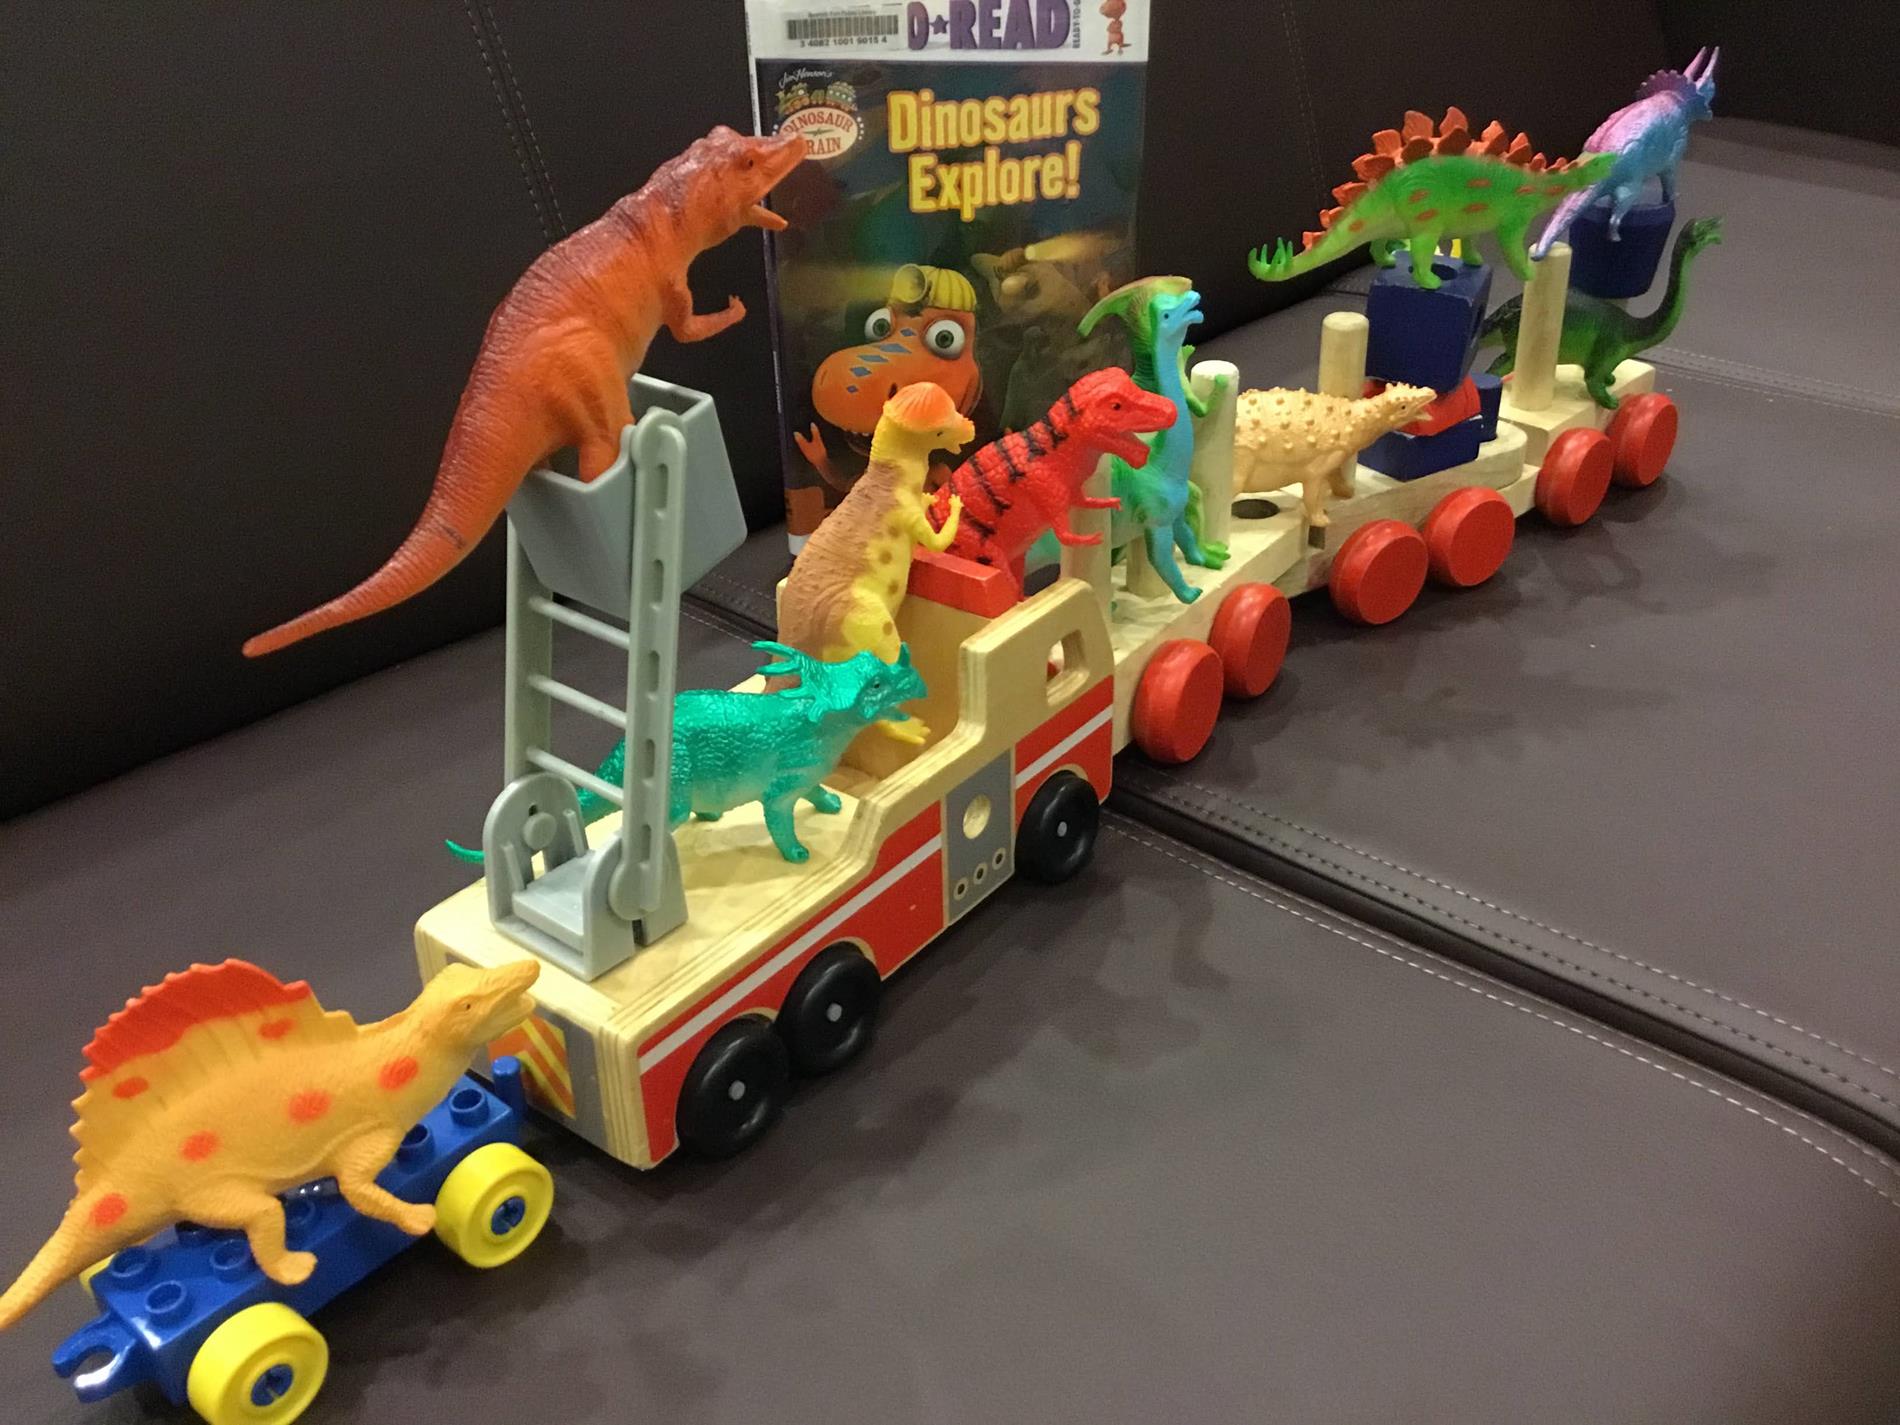 toy dinosaur figures arranged on a toy train made of wooden blocks staged beside a Learn to Read beginning Chapter book version of the title "Dinosaurs Explore" based on the PBS children's television show "Dinosaur Train". Click on photo for link to PBS page